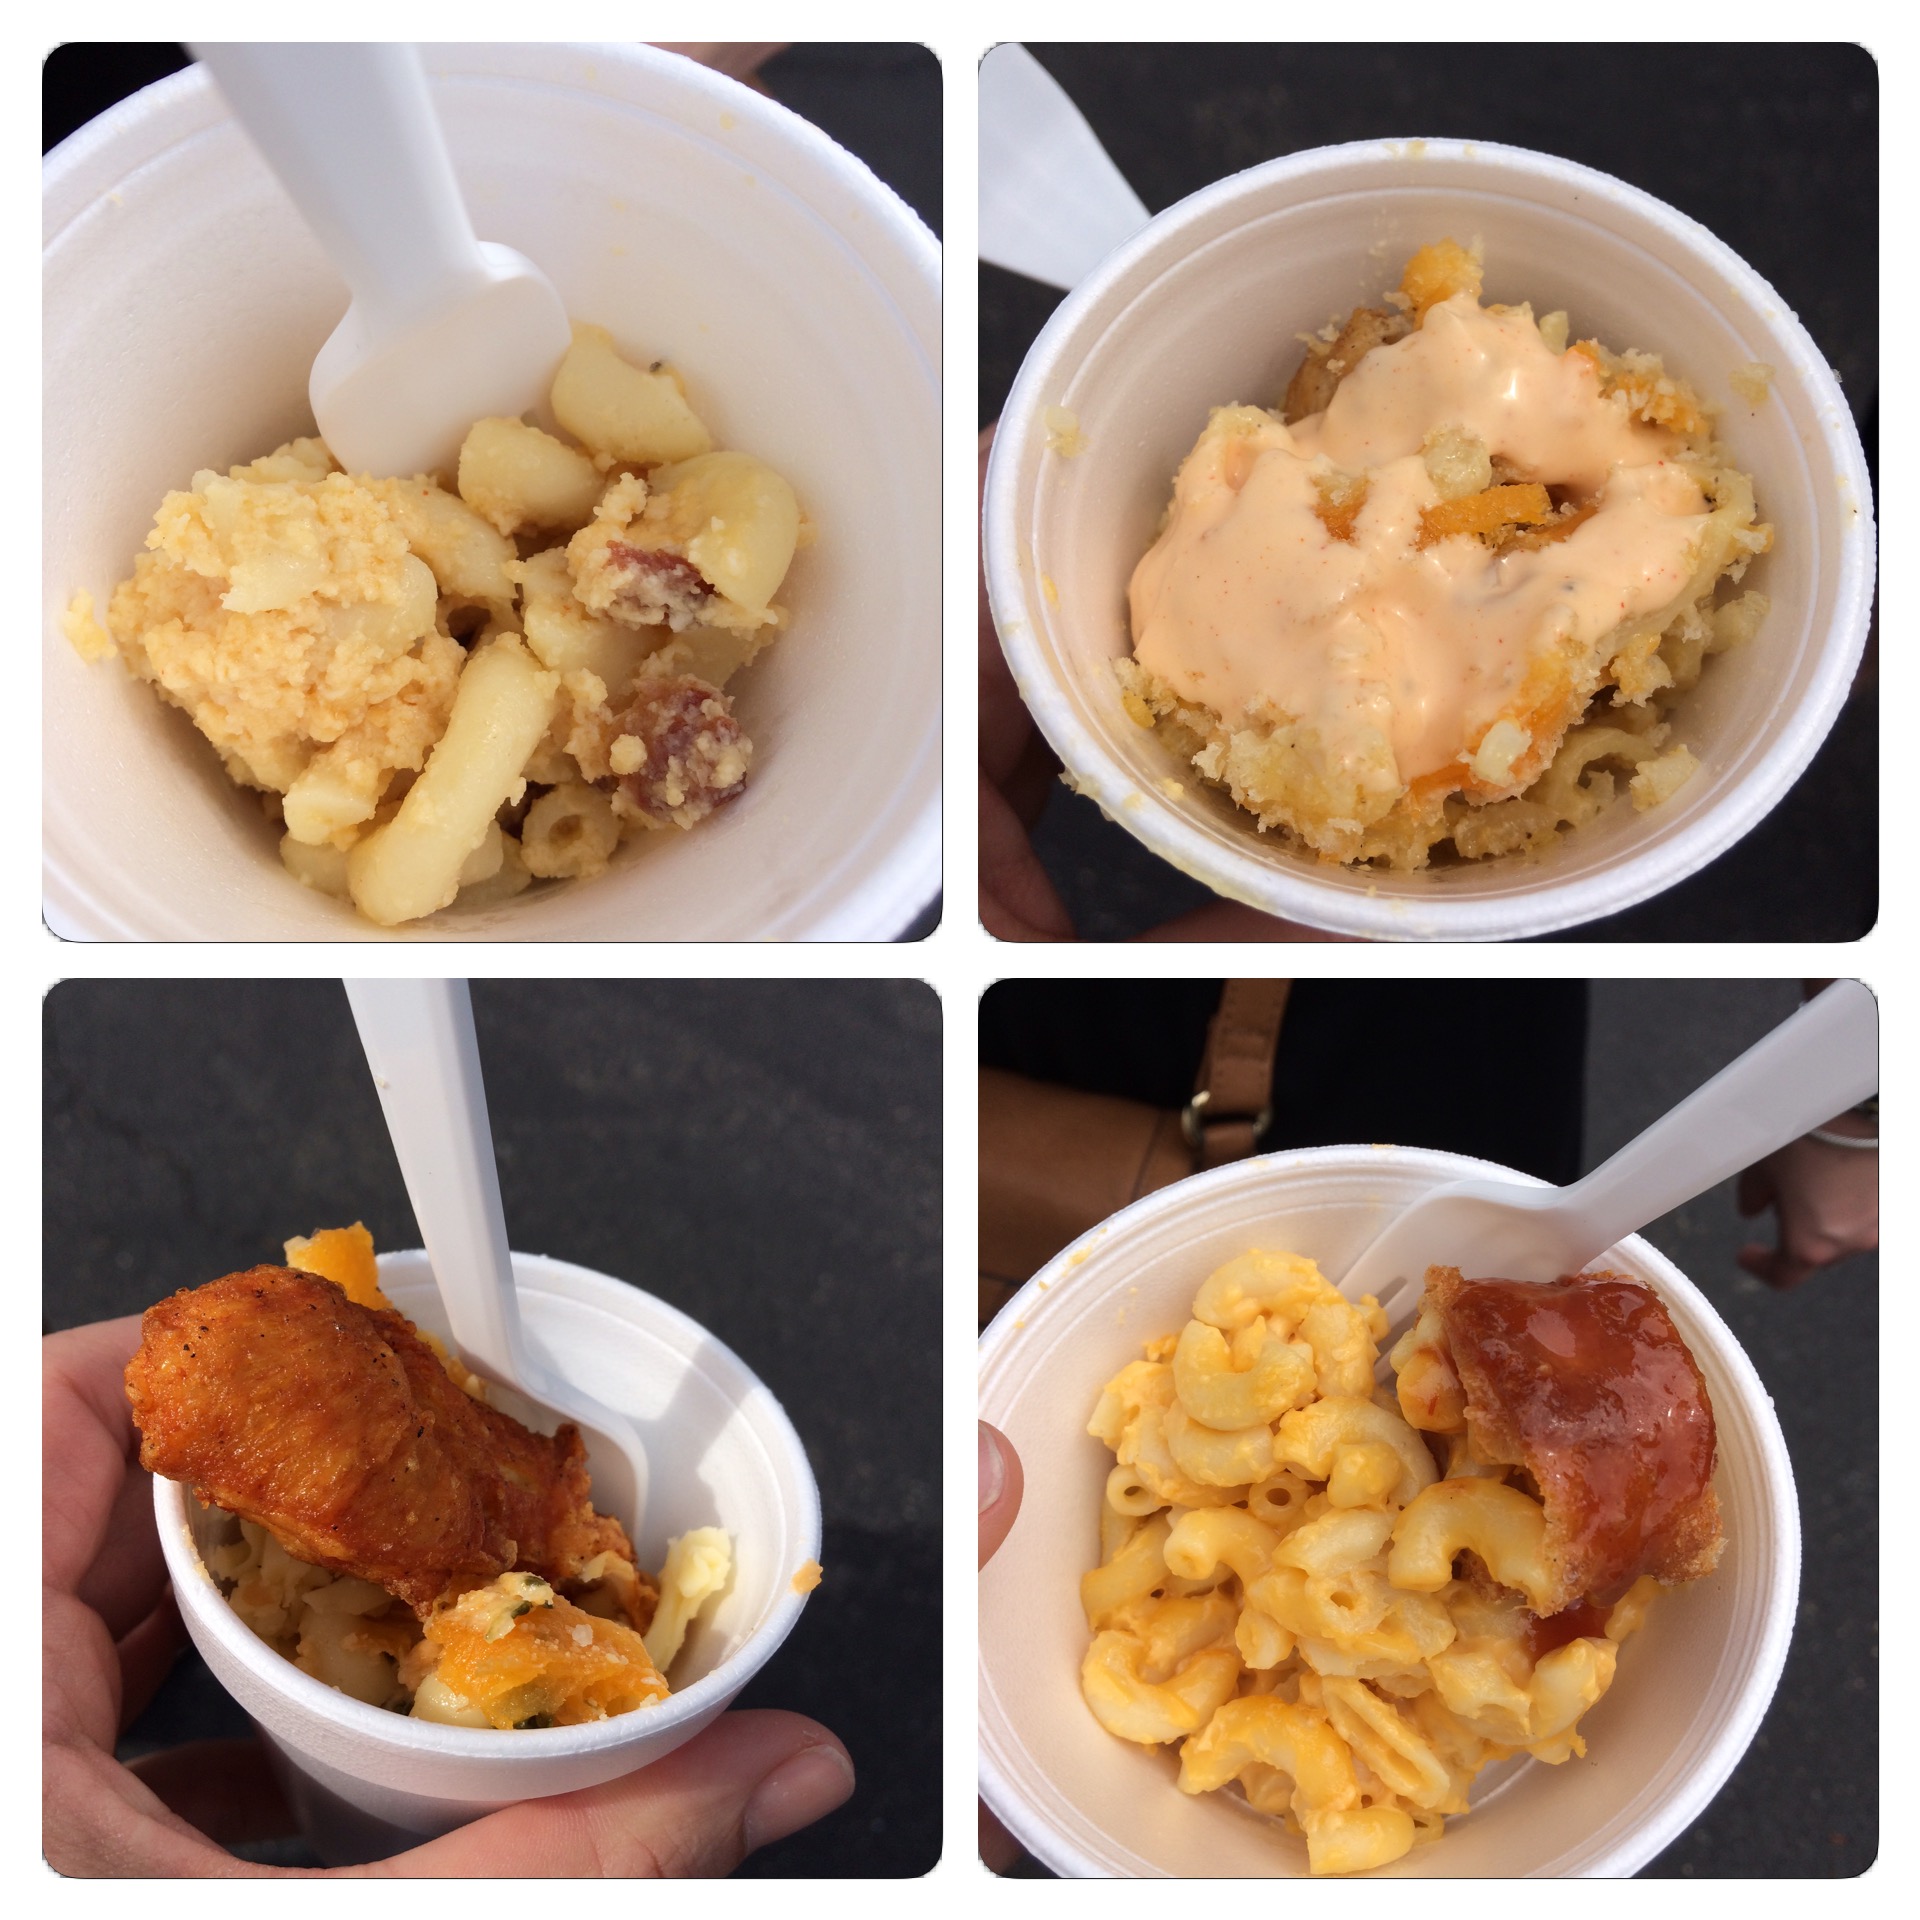 Here are some of the macaroni and cheese samples I tried at the Surf Foundation Dreams Mac-N-Cheese Cook Off including the mac and cheese egg roll and the fried chicken mac and cheese.